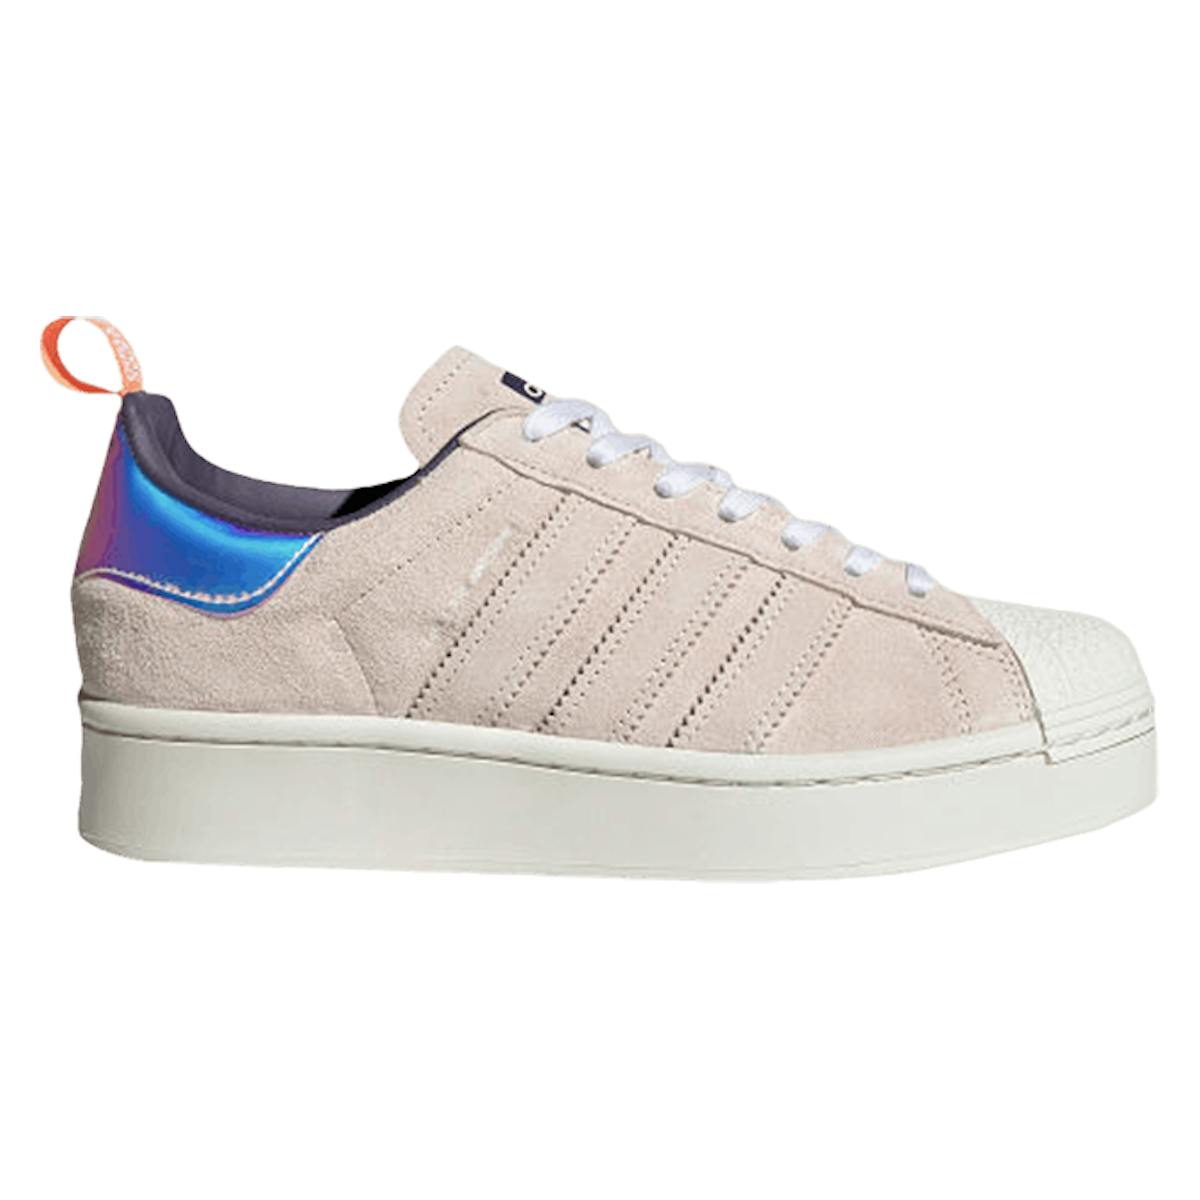 Girls Are Awesome x Adidas Superstar Bold "Icey Pink"